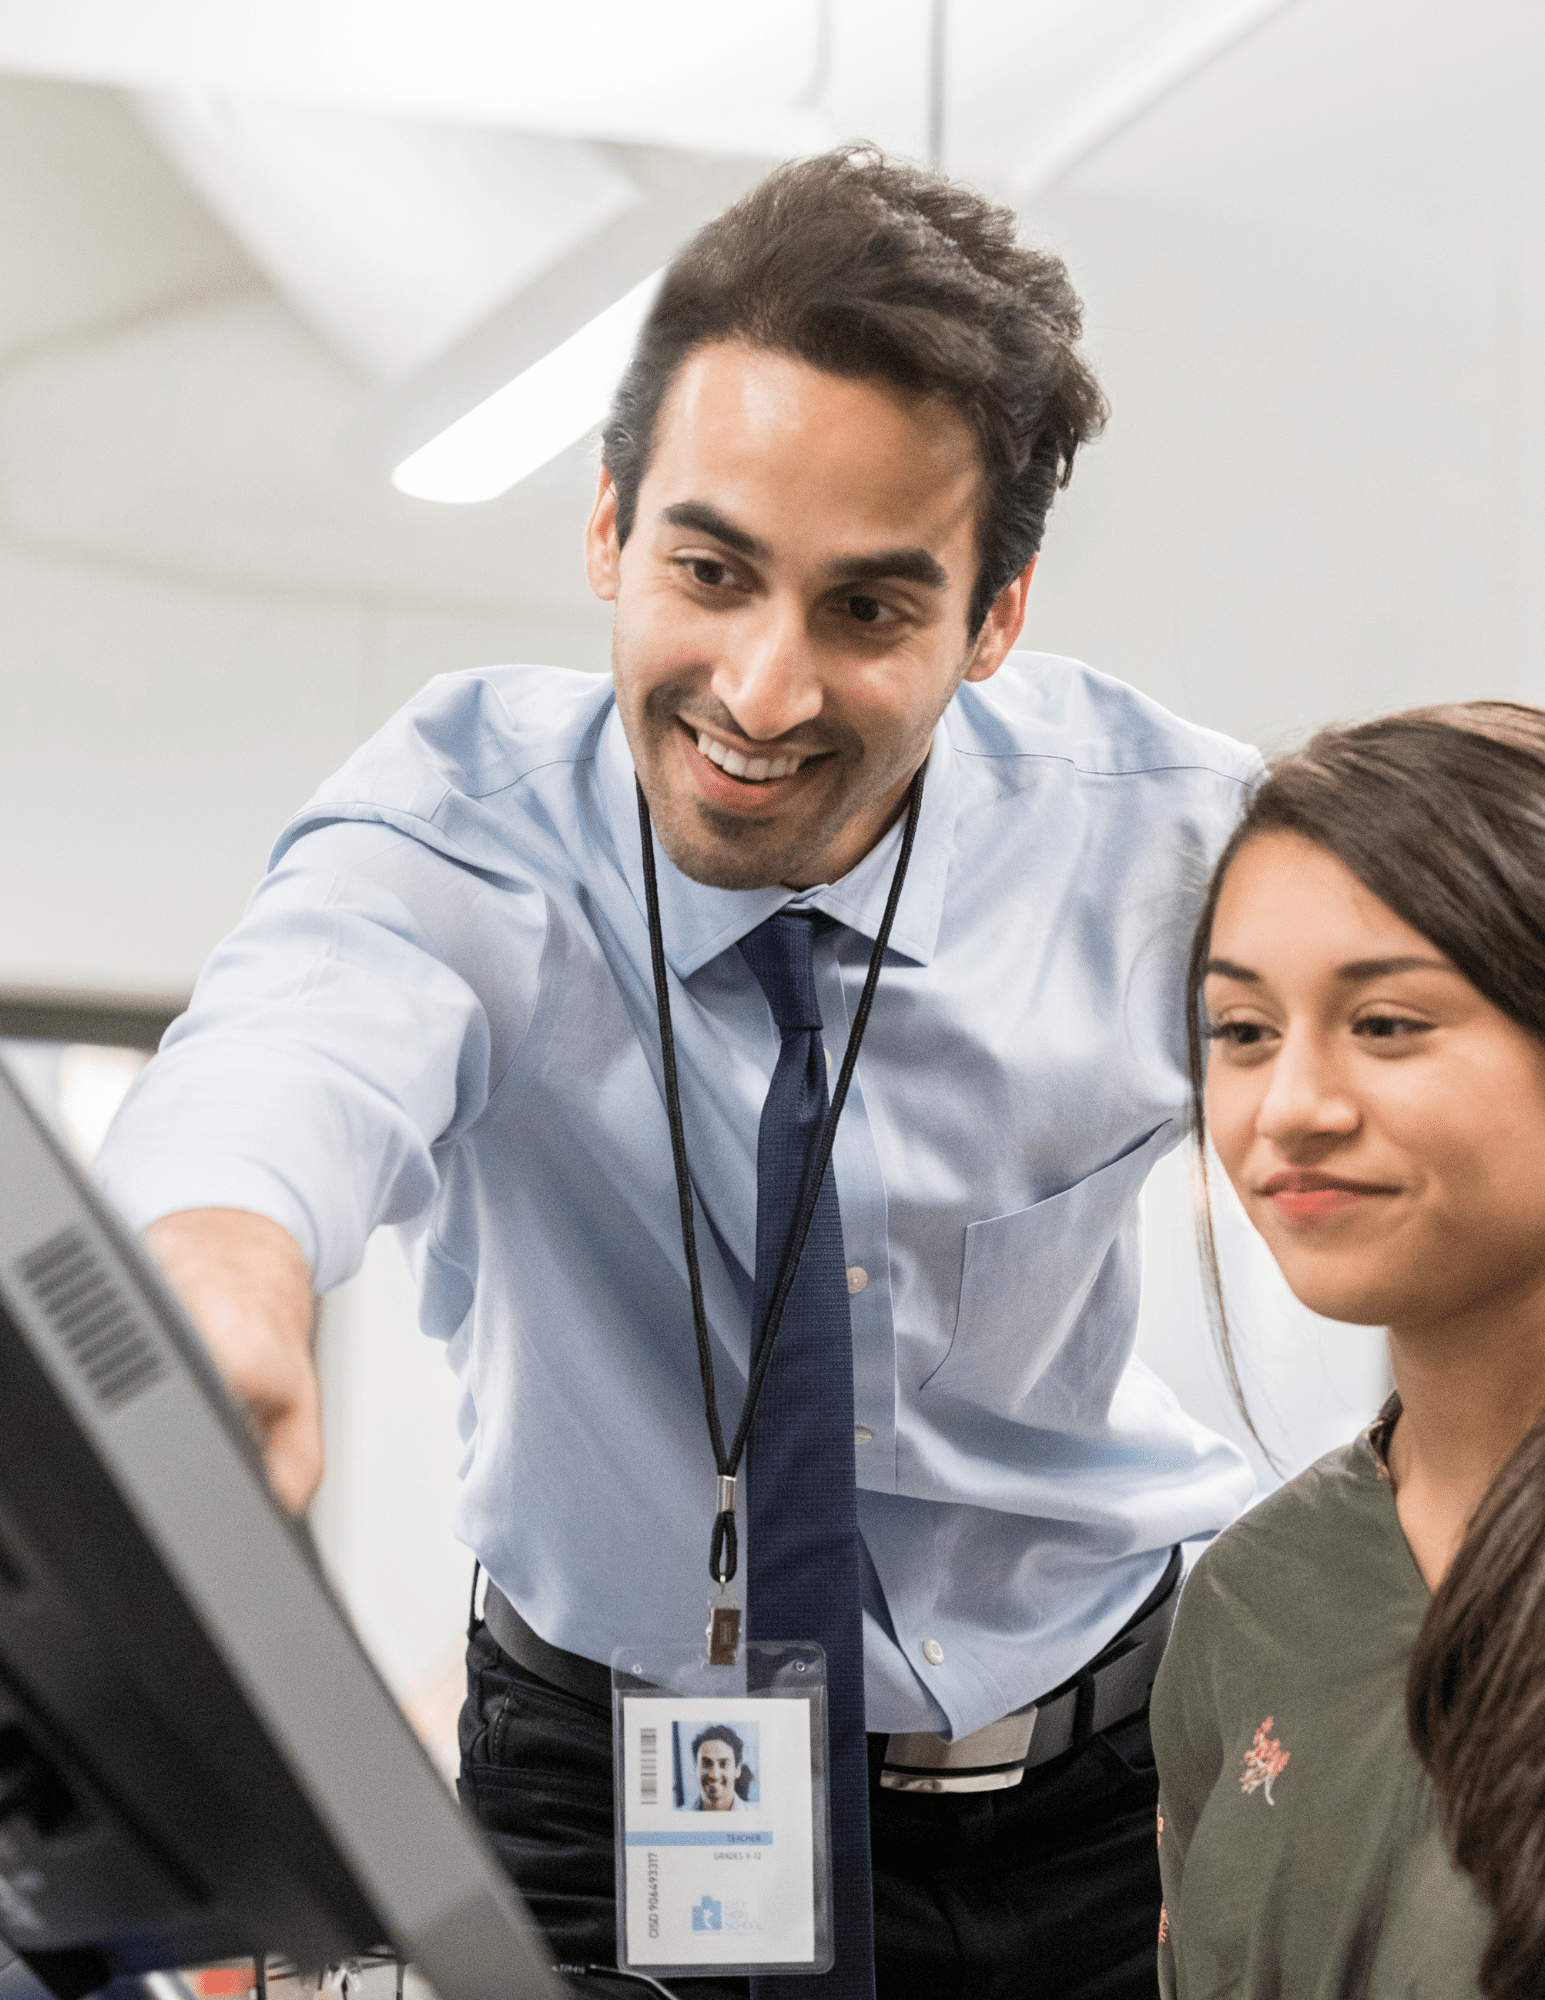 IT guy pointing at computer screen showing smiling woman something